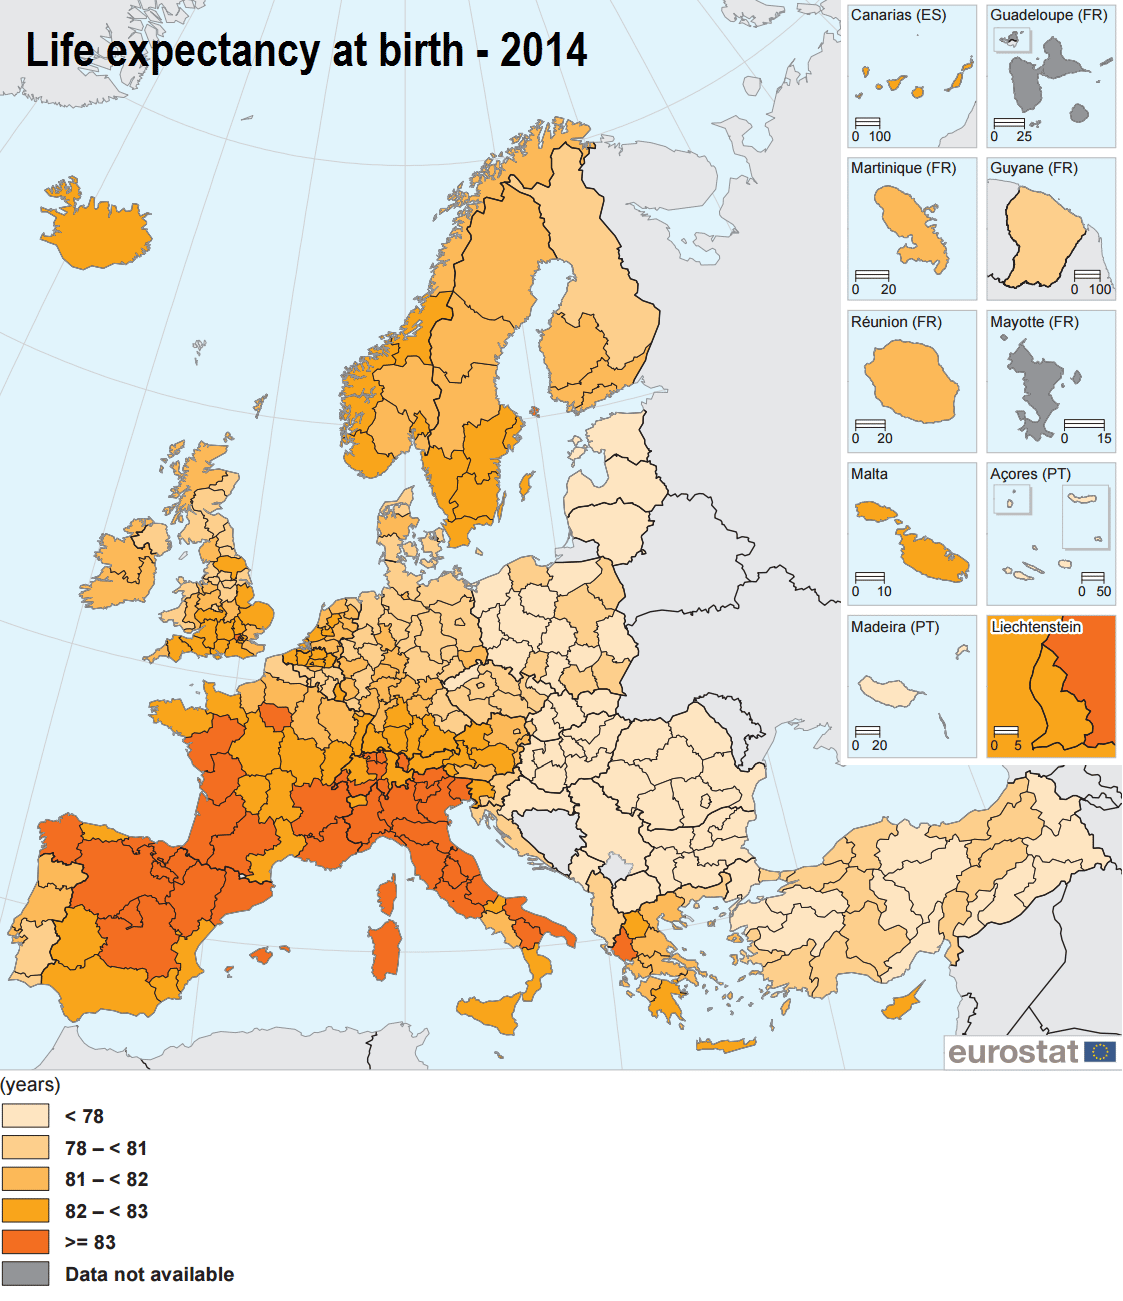 Life expectancy at birth in Europe